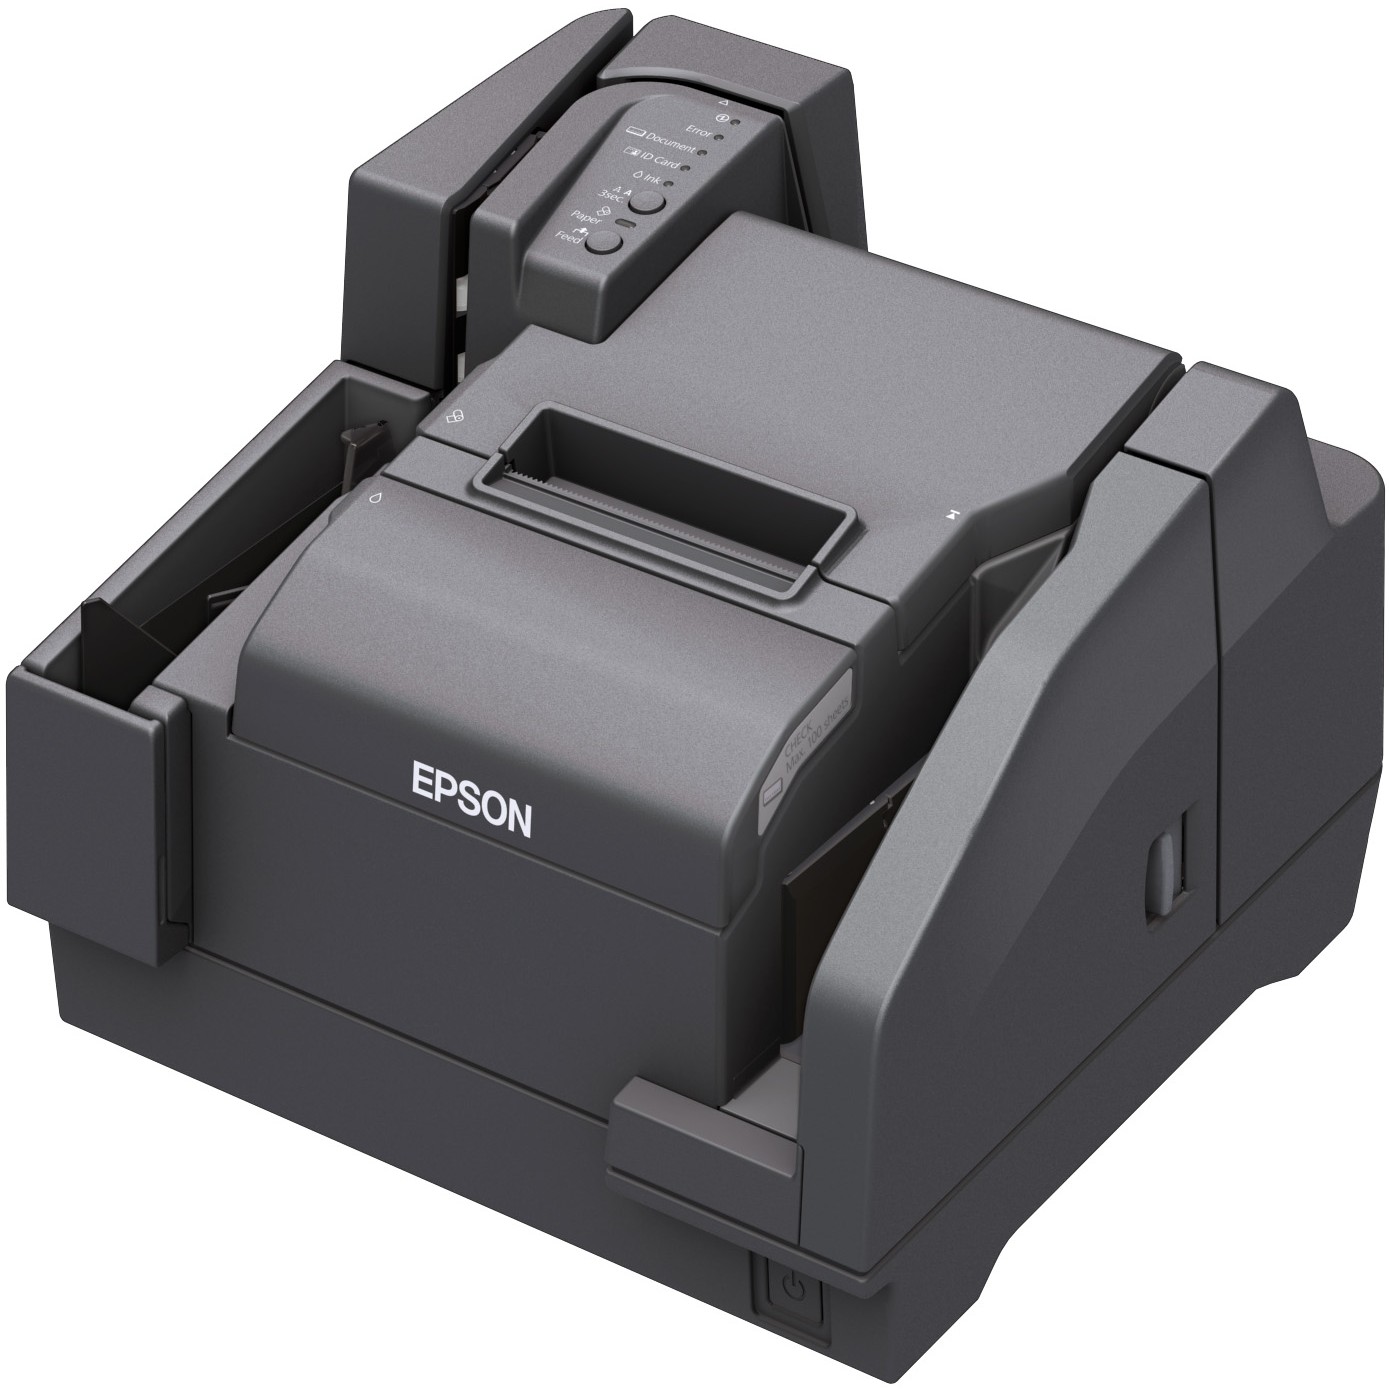 Epson Tm-S9000 Multifunction Scanner EPT-A41A267021